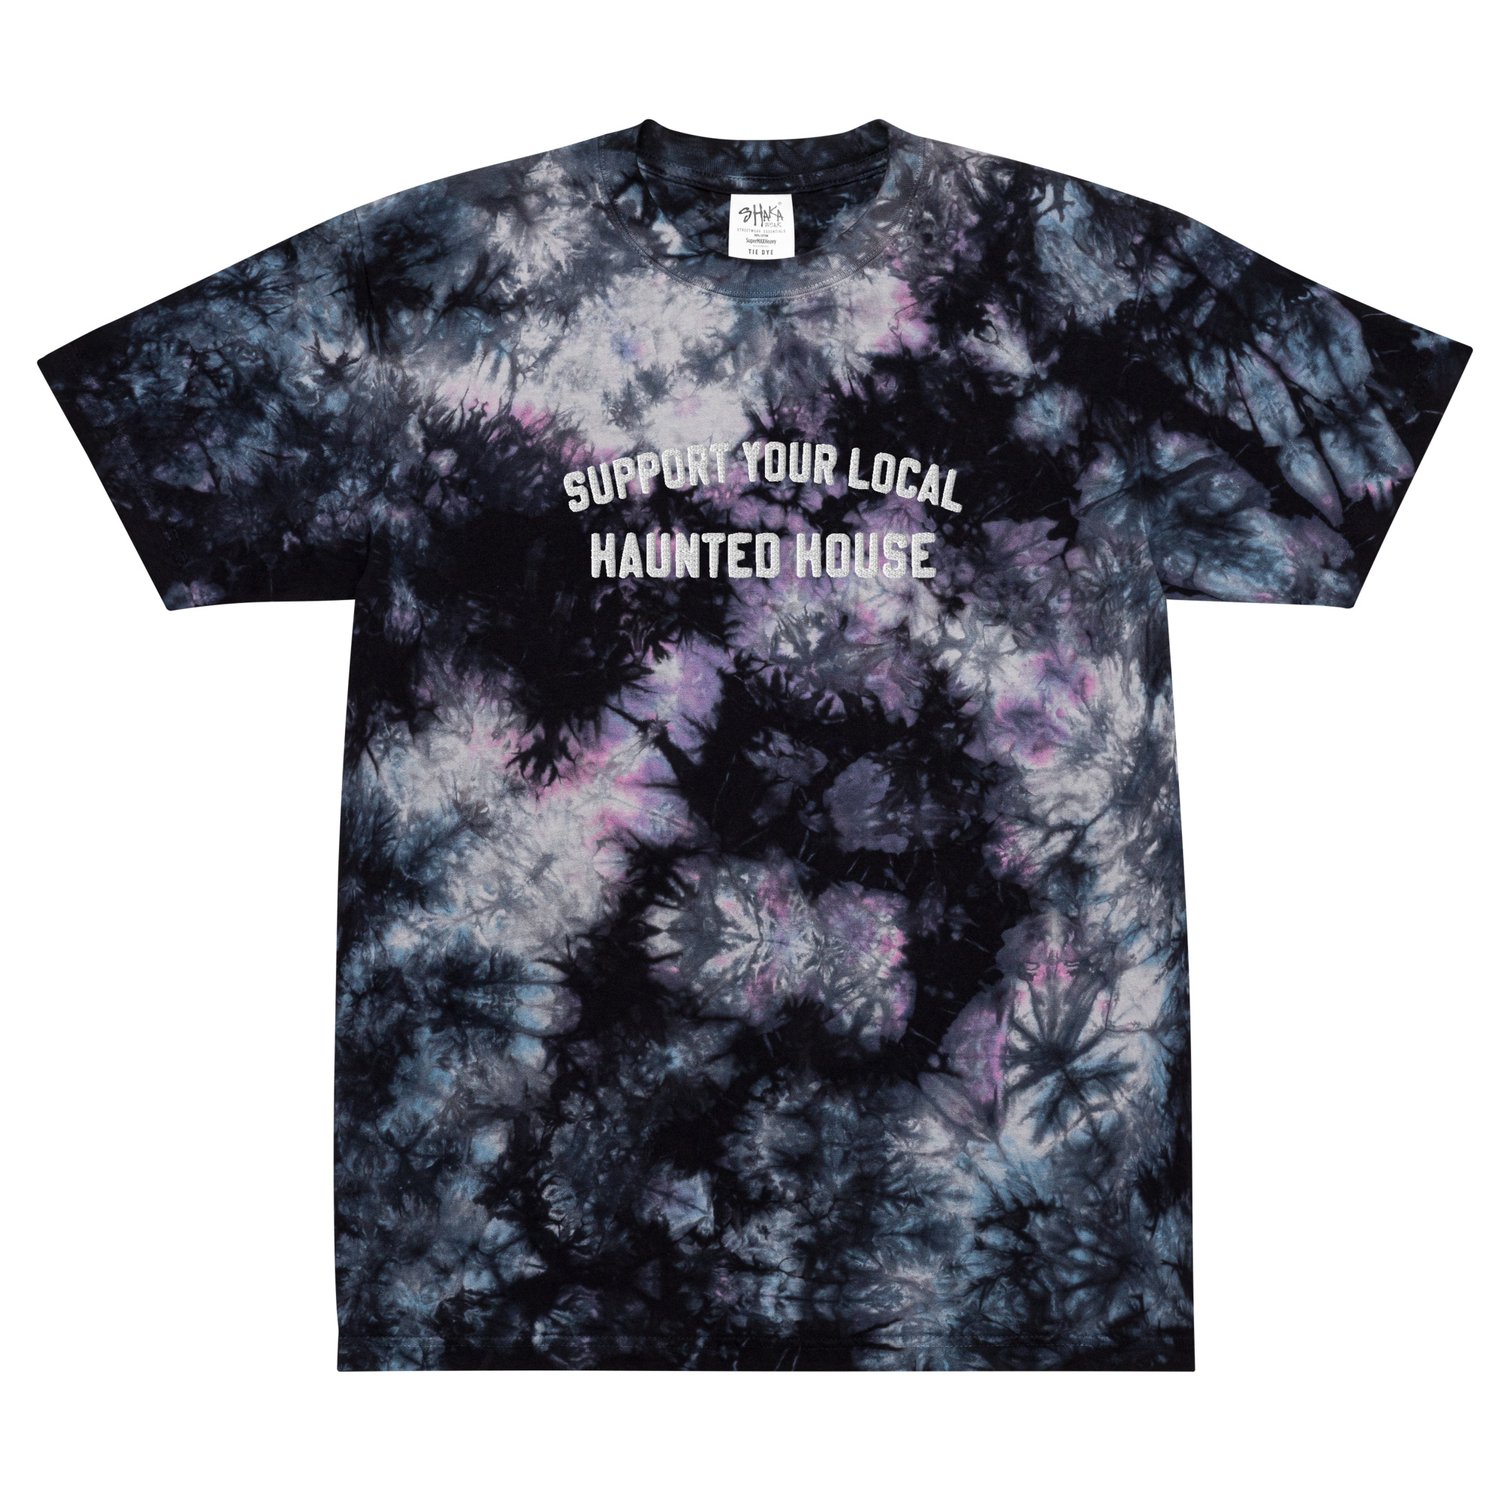 Image of Support Your Local Haunted House oversized tie-dye t-shirt